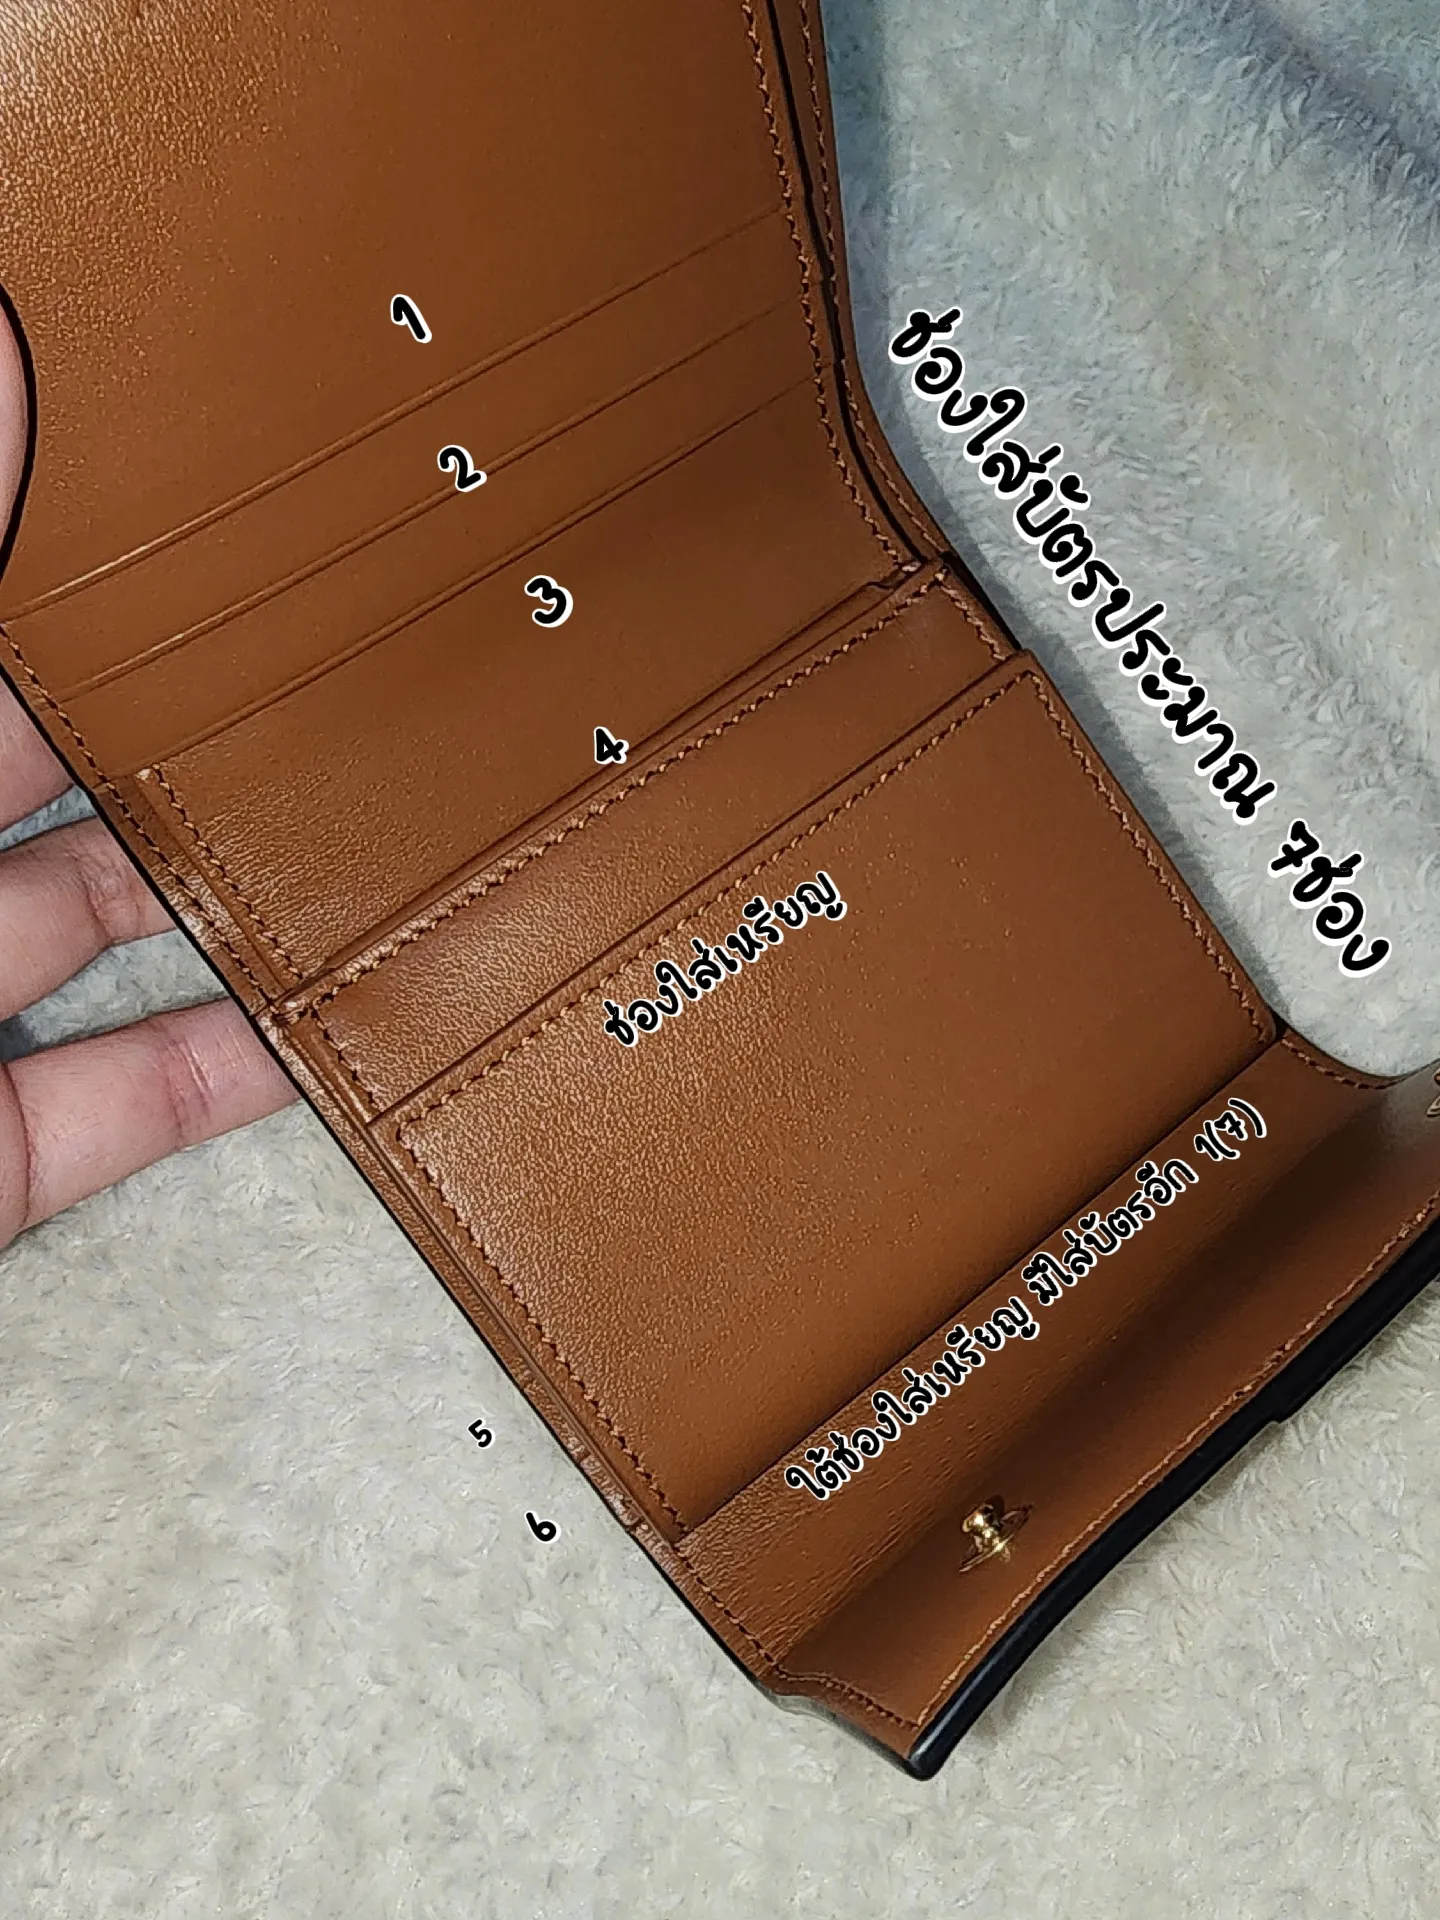 LOUIS VUITTON MICRO WALLET REVIEW &COMPARISON /Which one will you pick? 